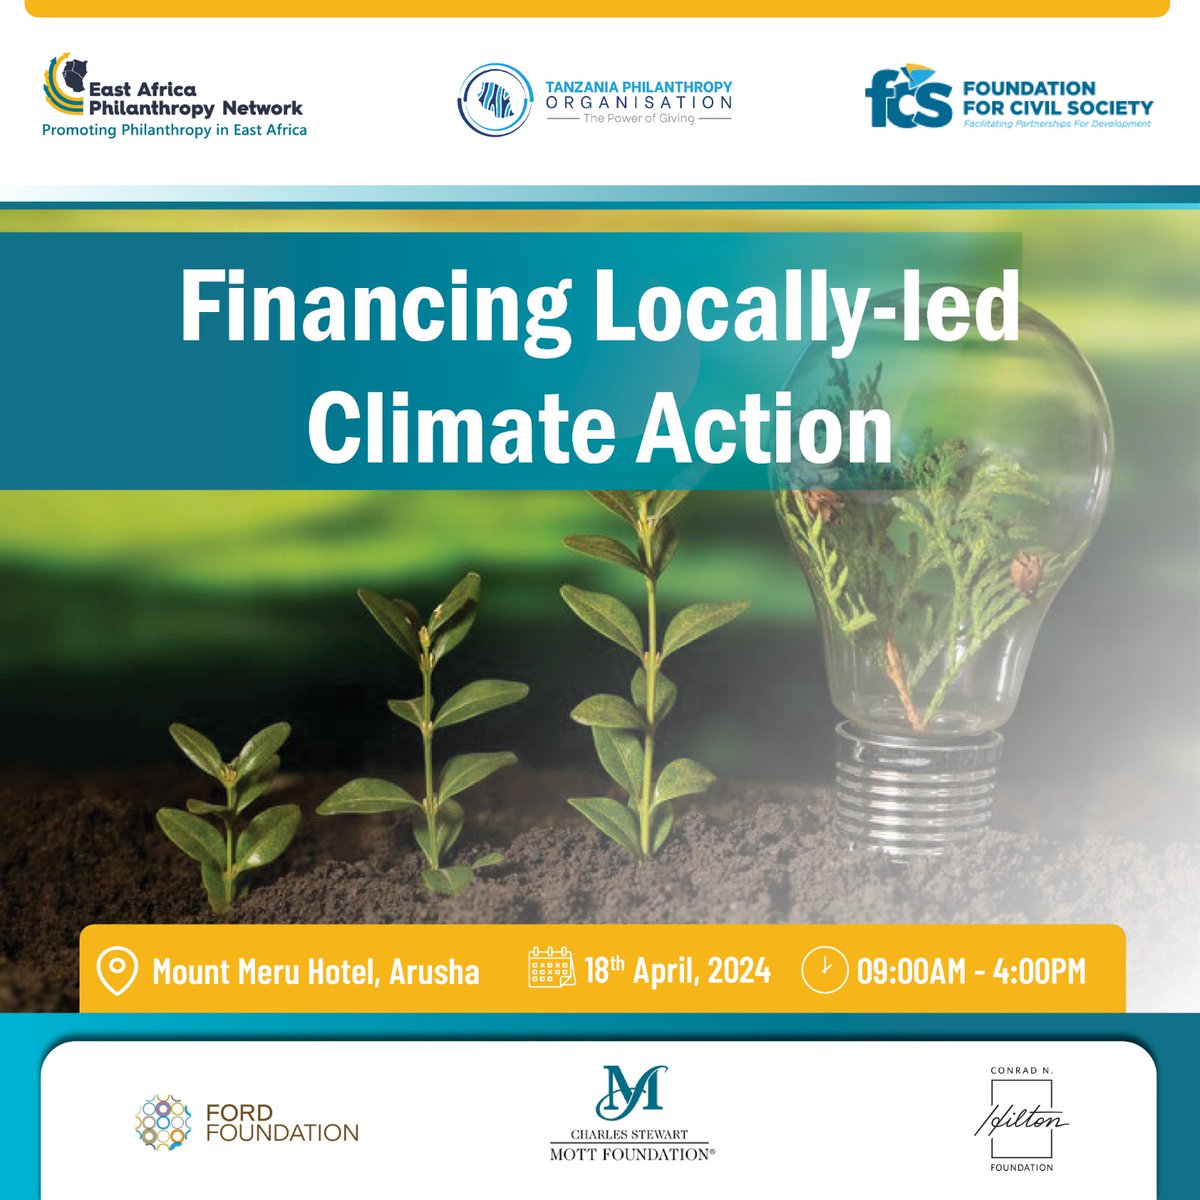 The path to climate resilience is obstructed by a significant financial gap in climate funding, especially for locally-led initiatives that are crucial for community-based adaptation and mitigation efforts. This financial deficit not only hampers the implementation of essential